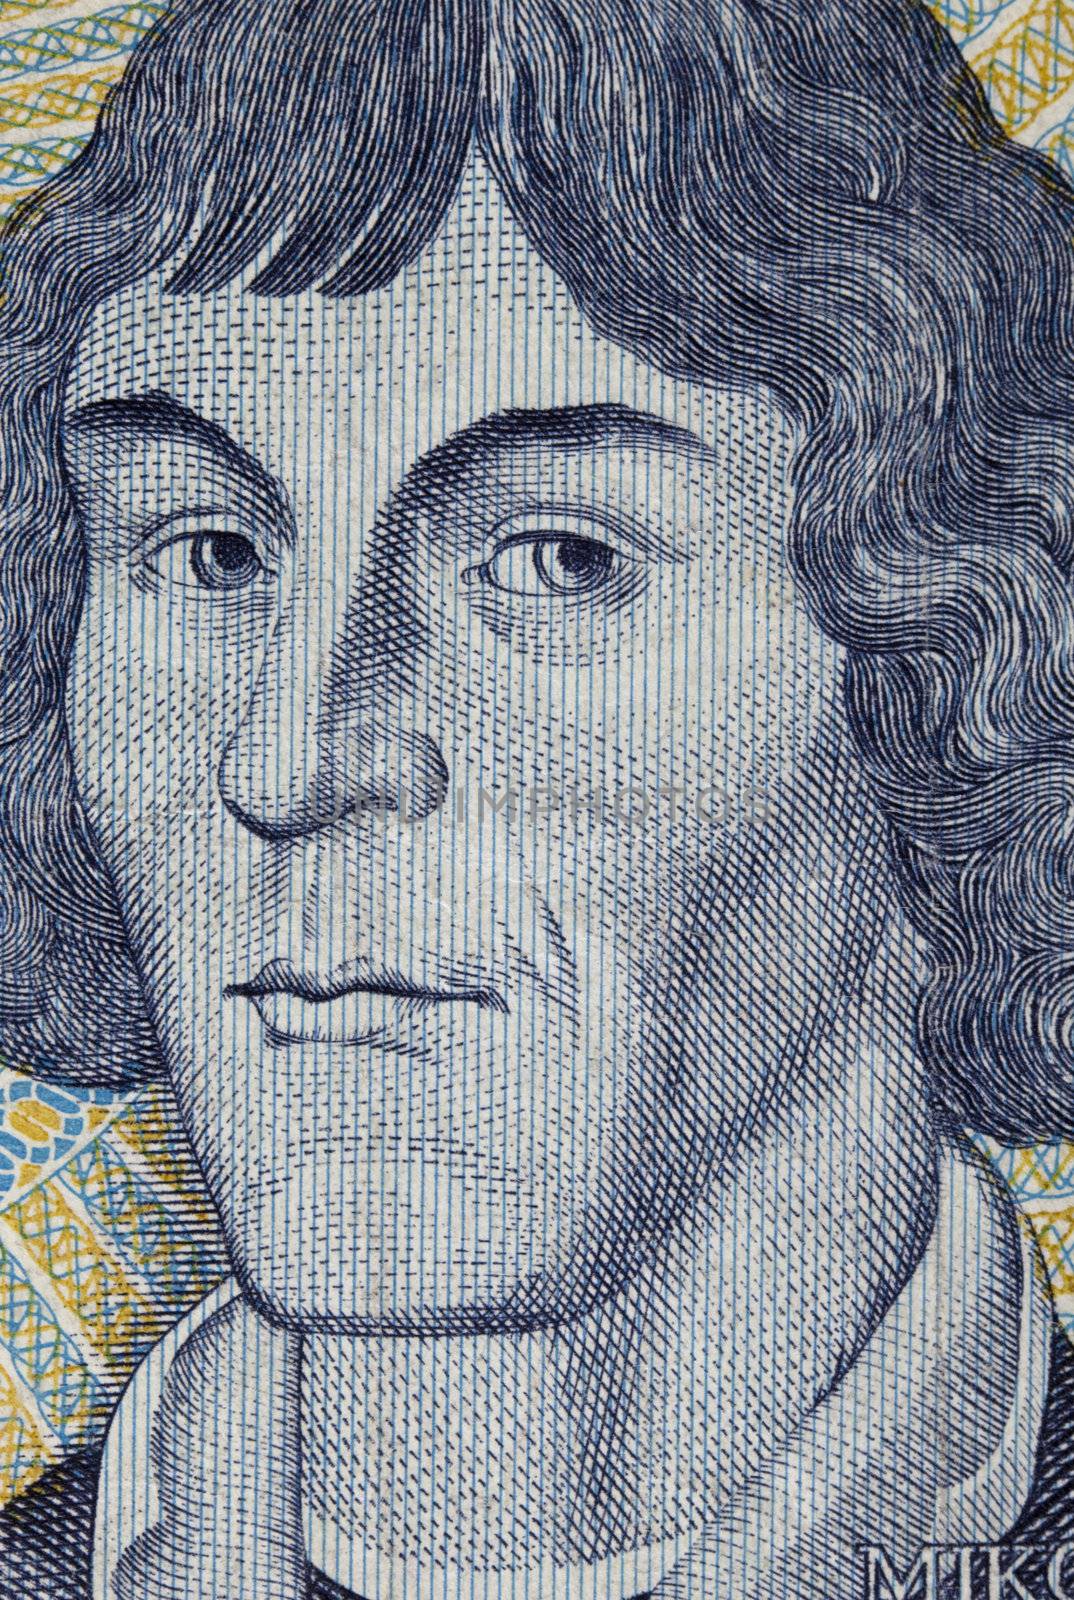 portrait of Nicolaus Copernicus - detail of engraving on 1000 zloty banknote from Poland